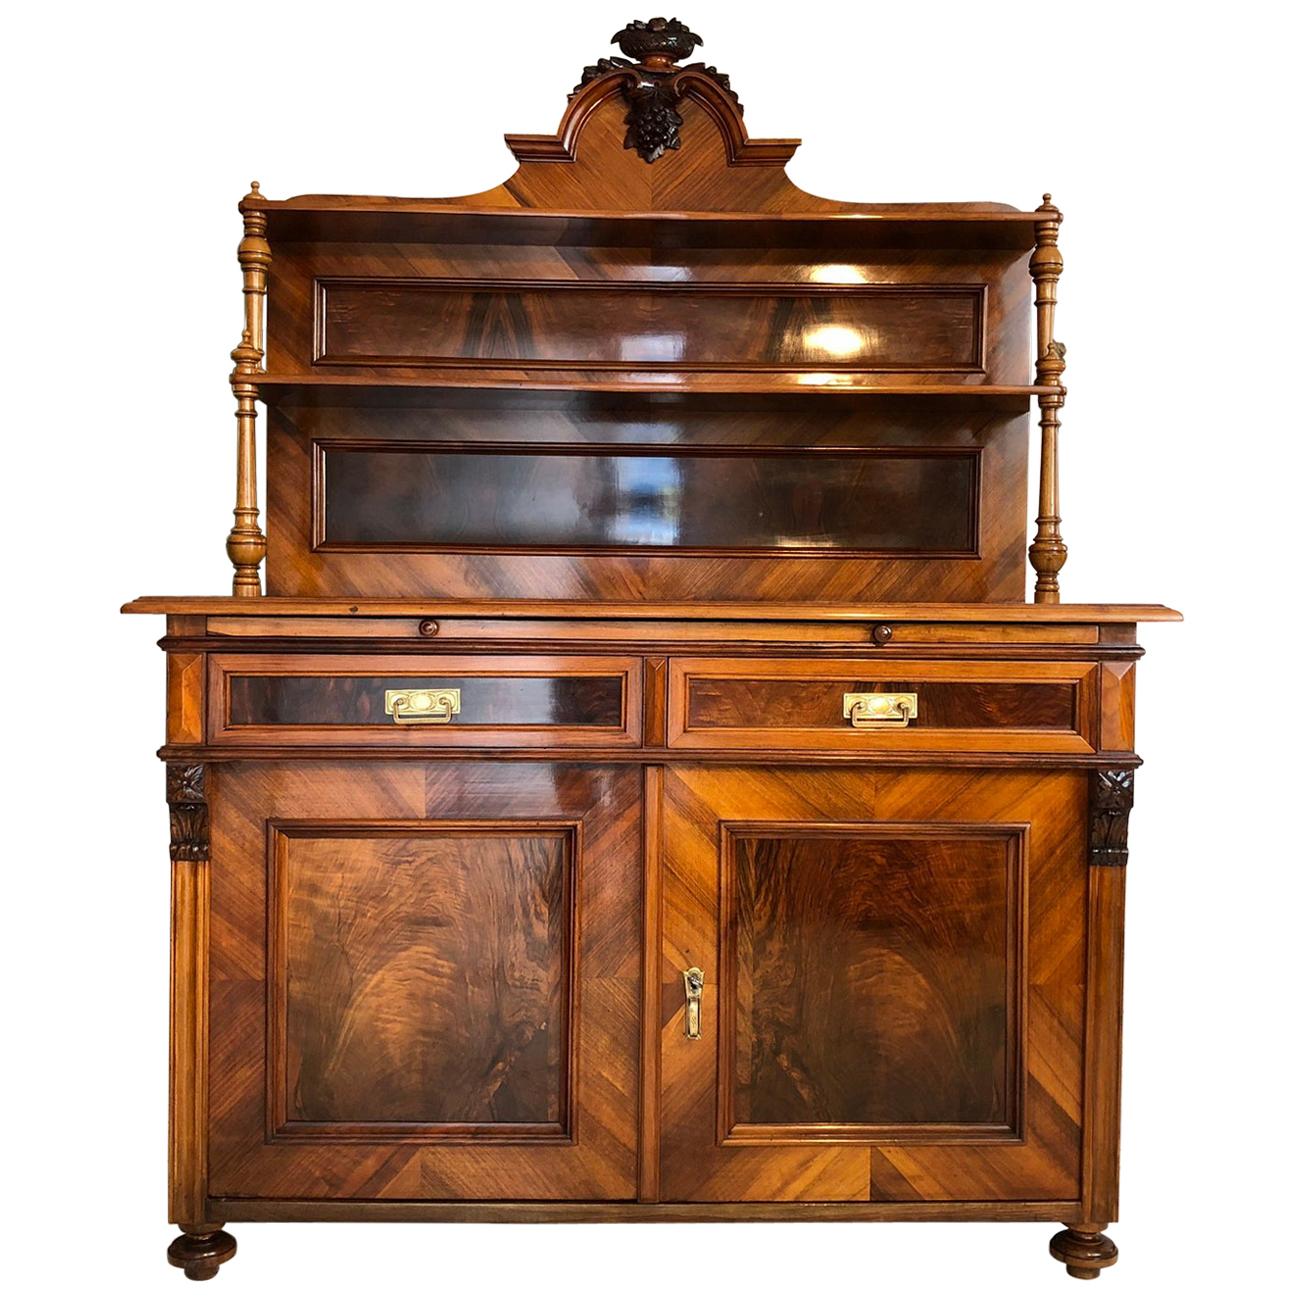 1870s Historicism Buffet with a Walnut Veneer For Sale